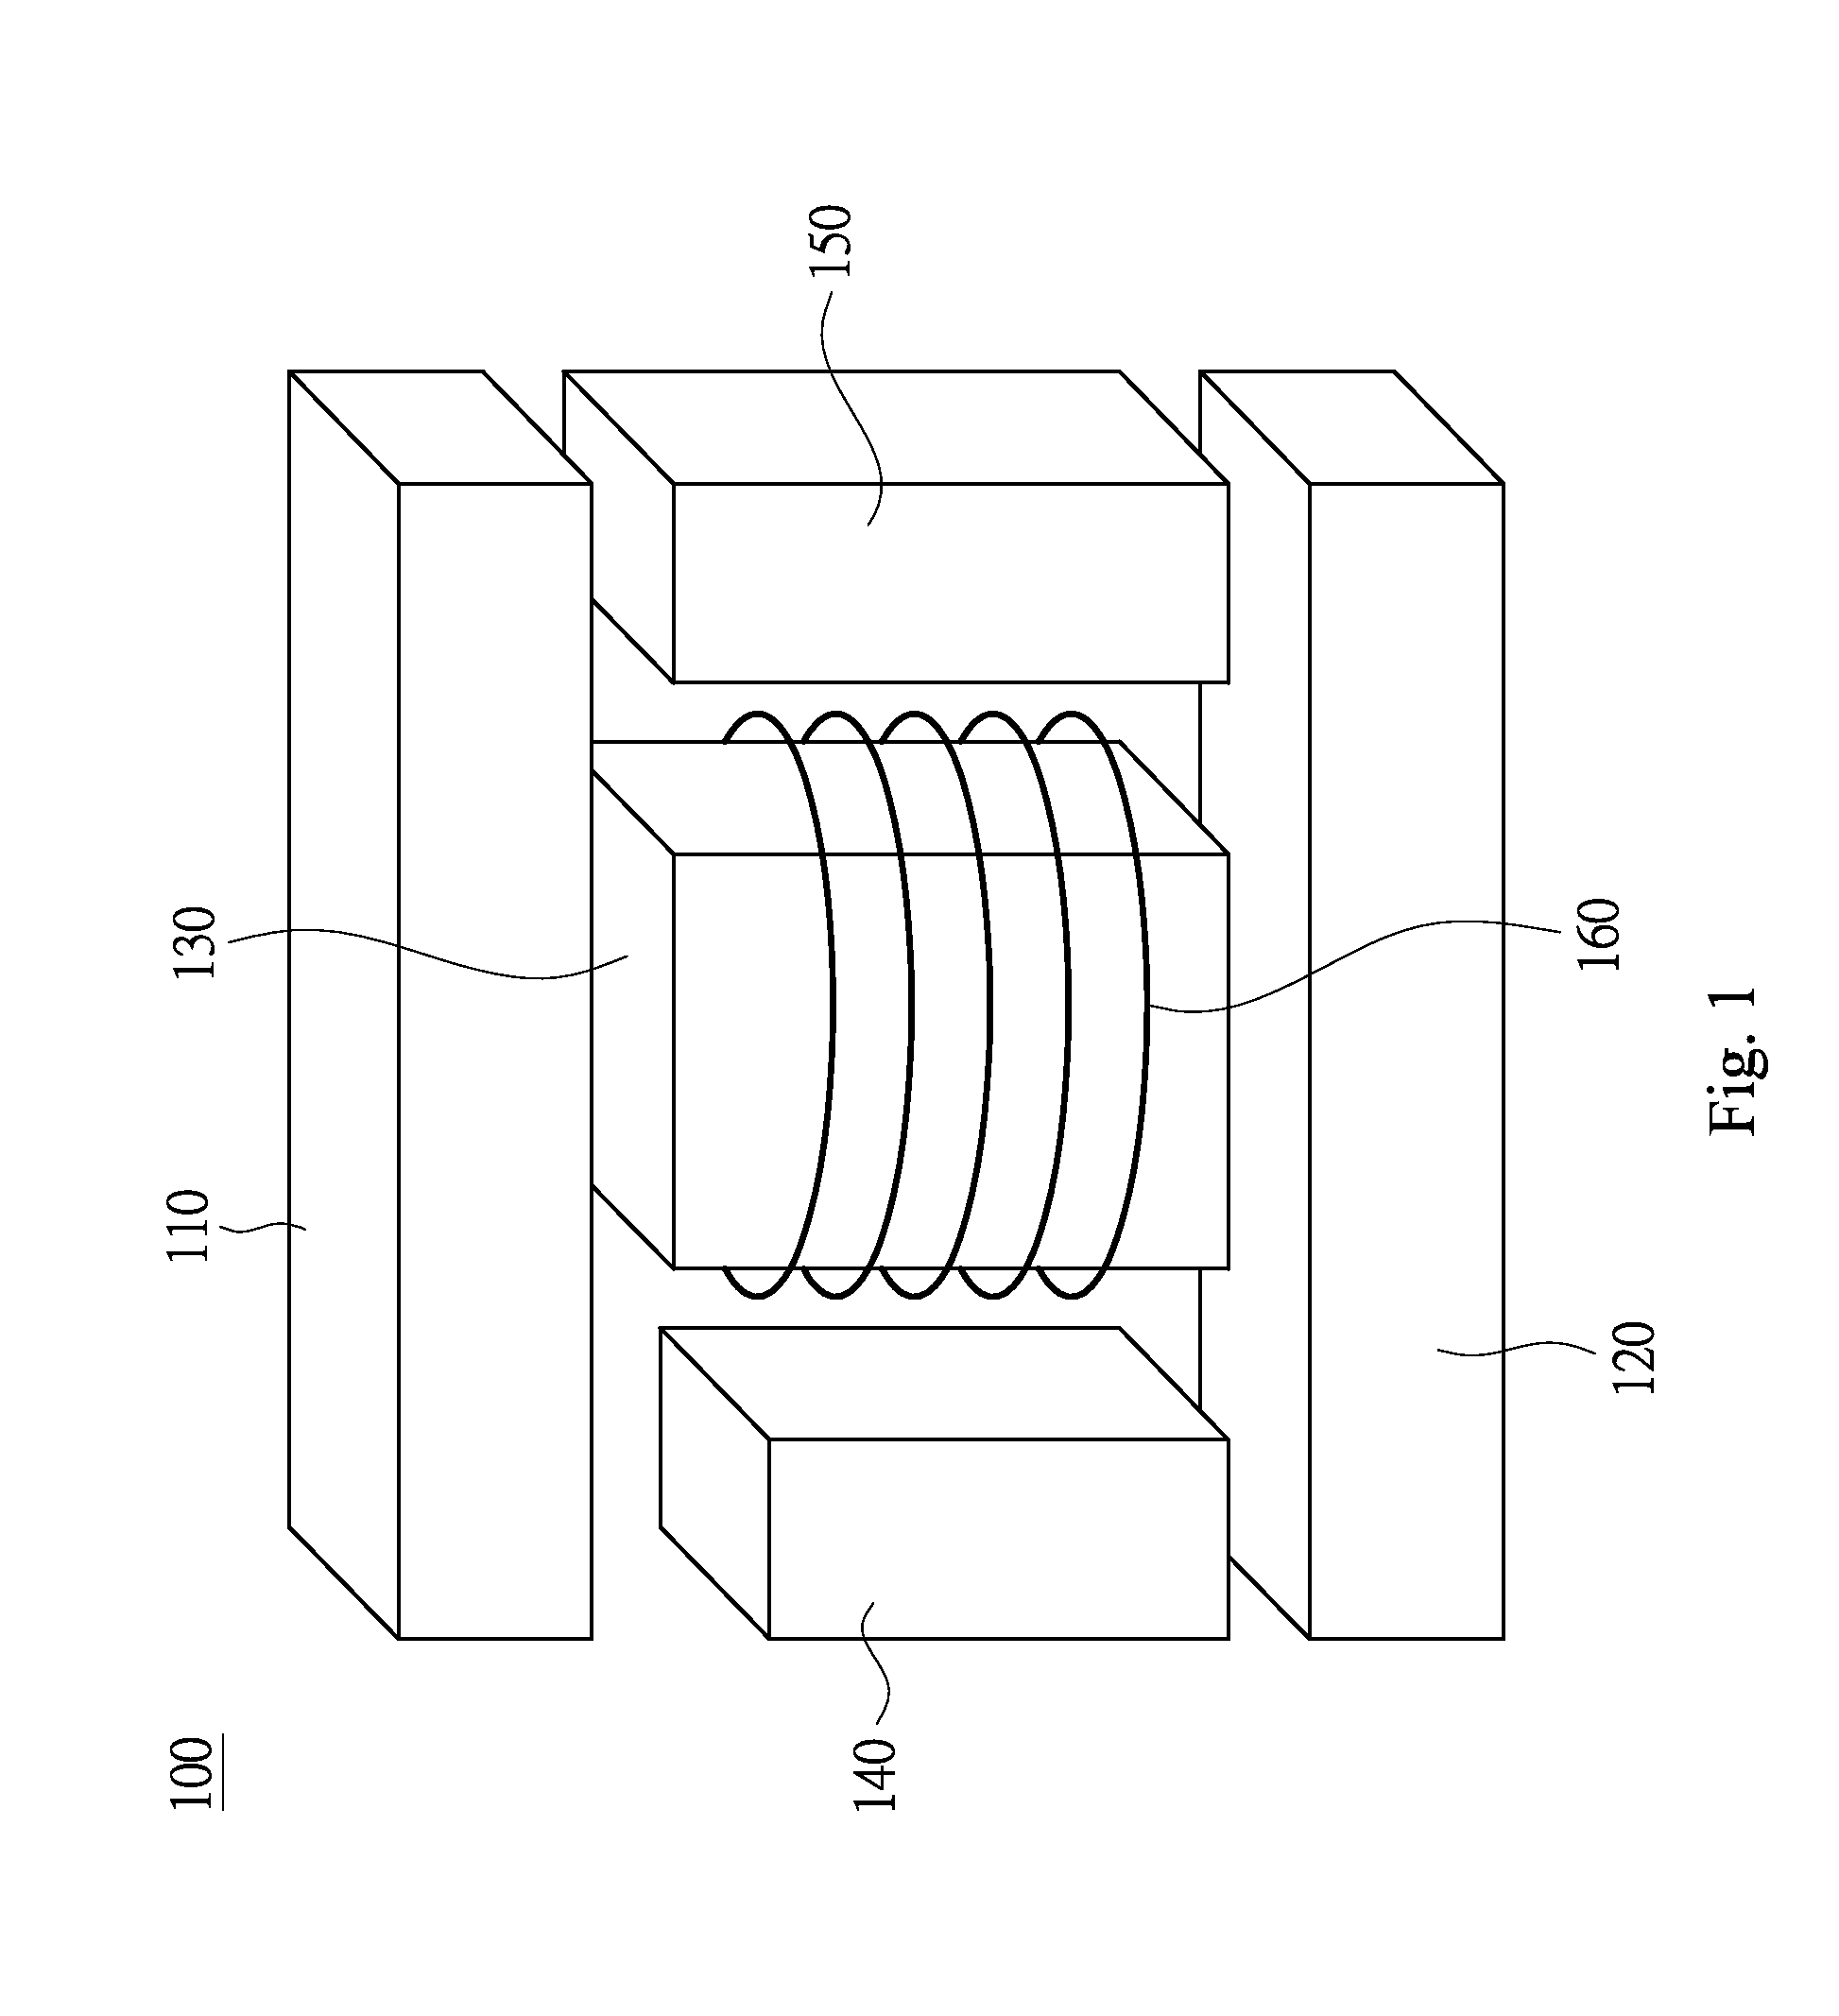 Nonlinear inductor